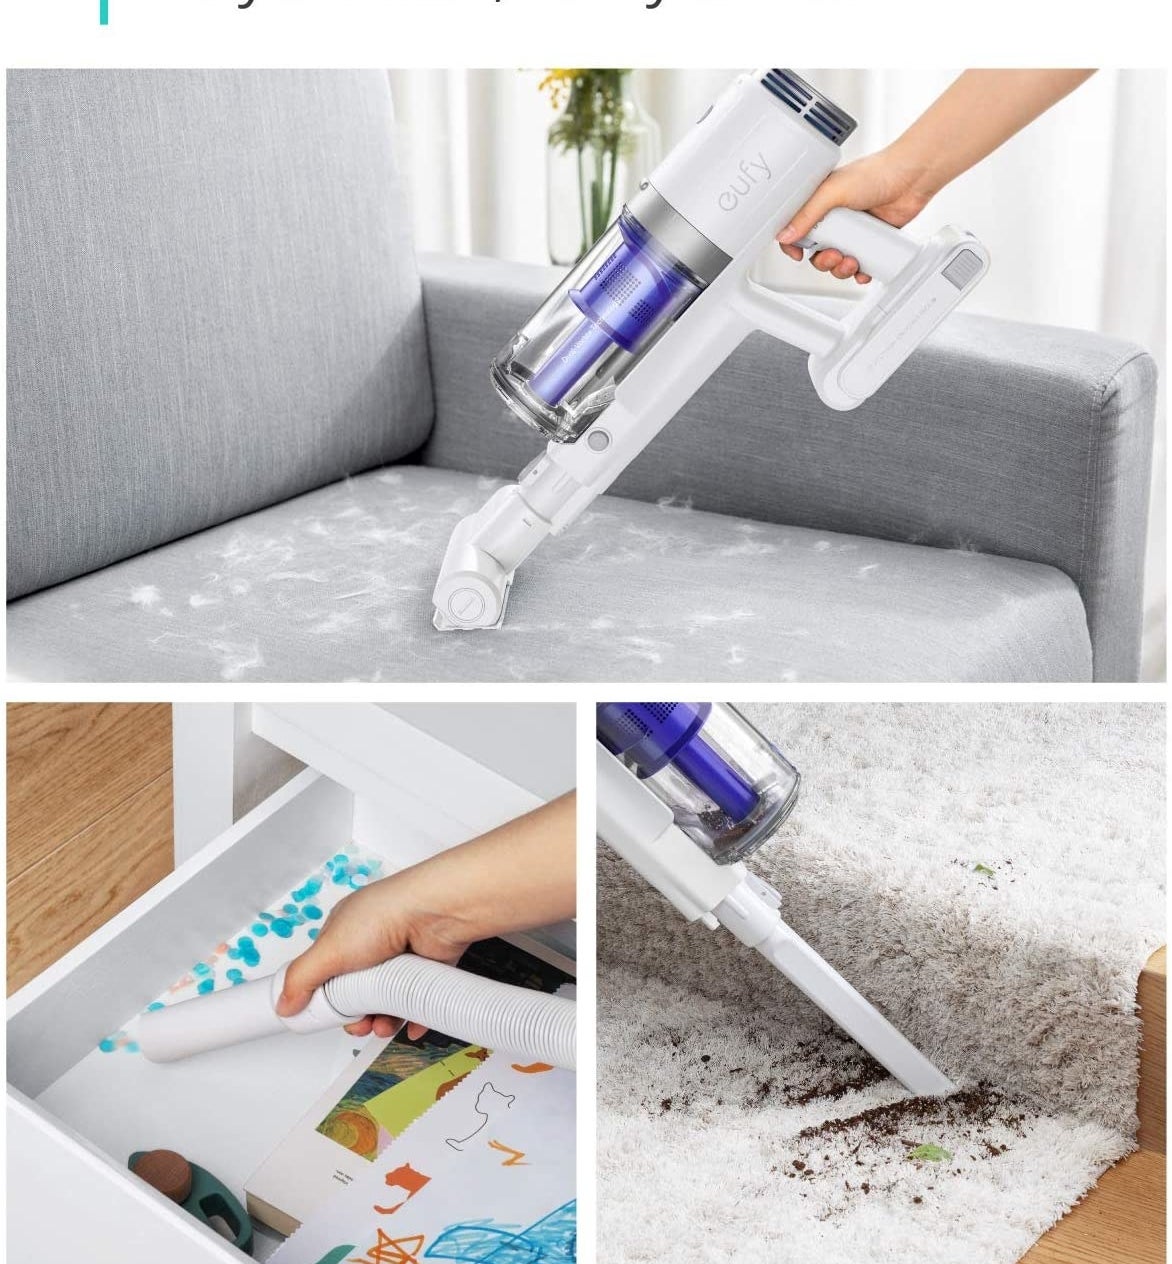 series of photos showing different ways the vacuum can be used